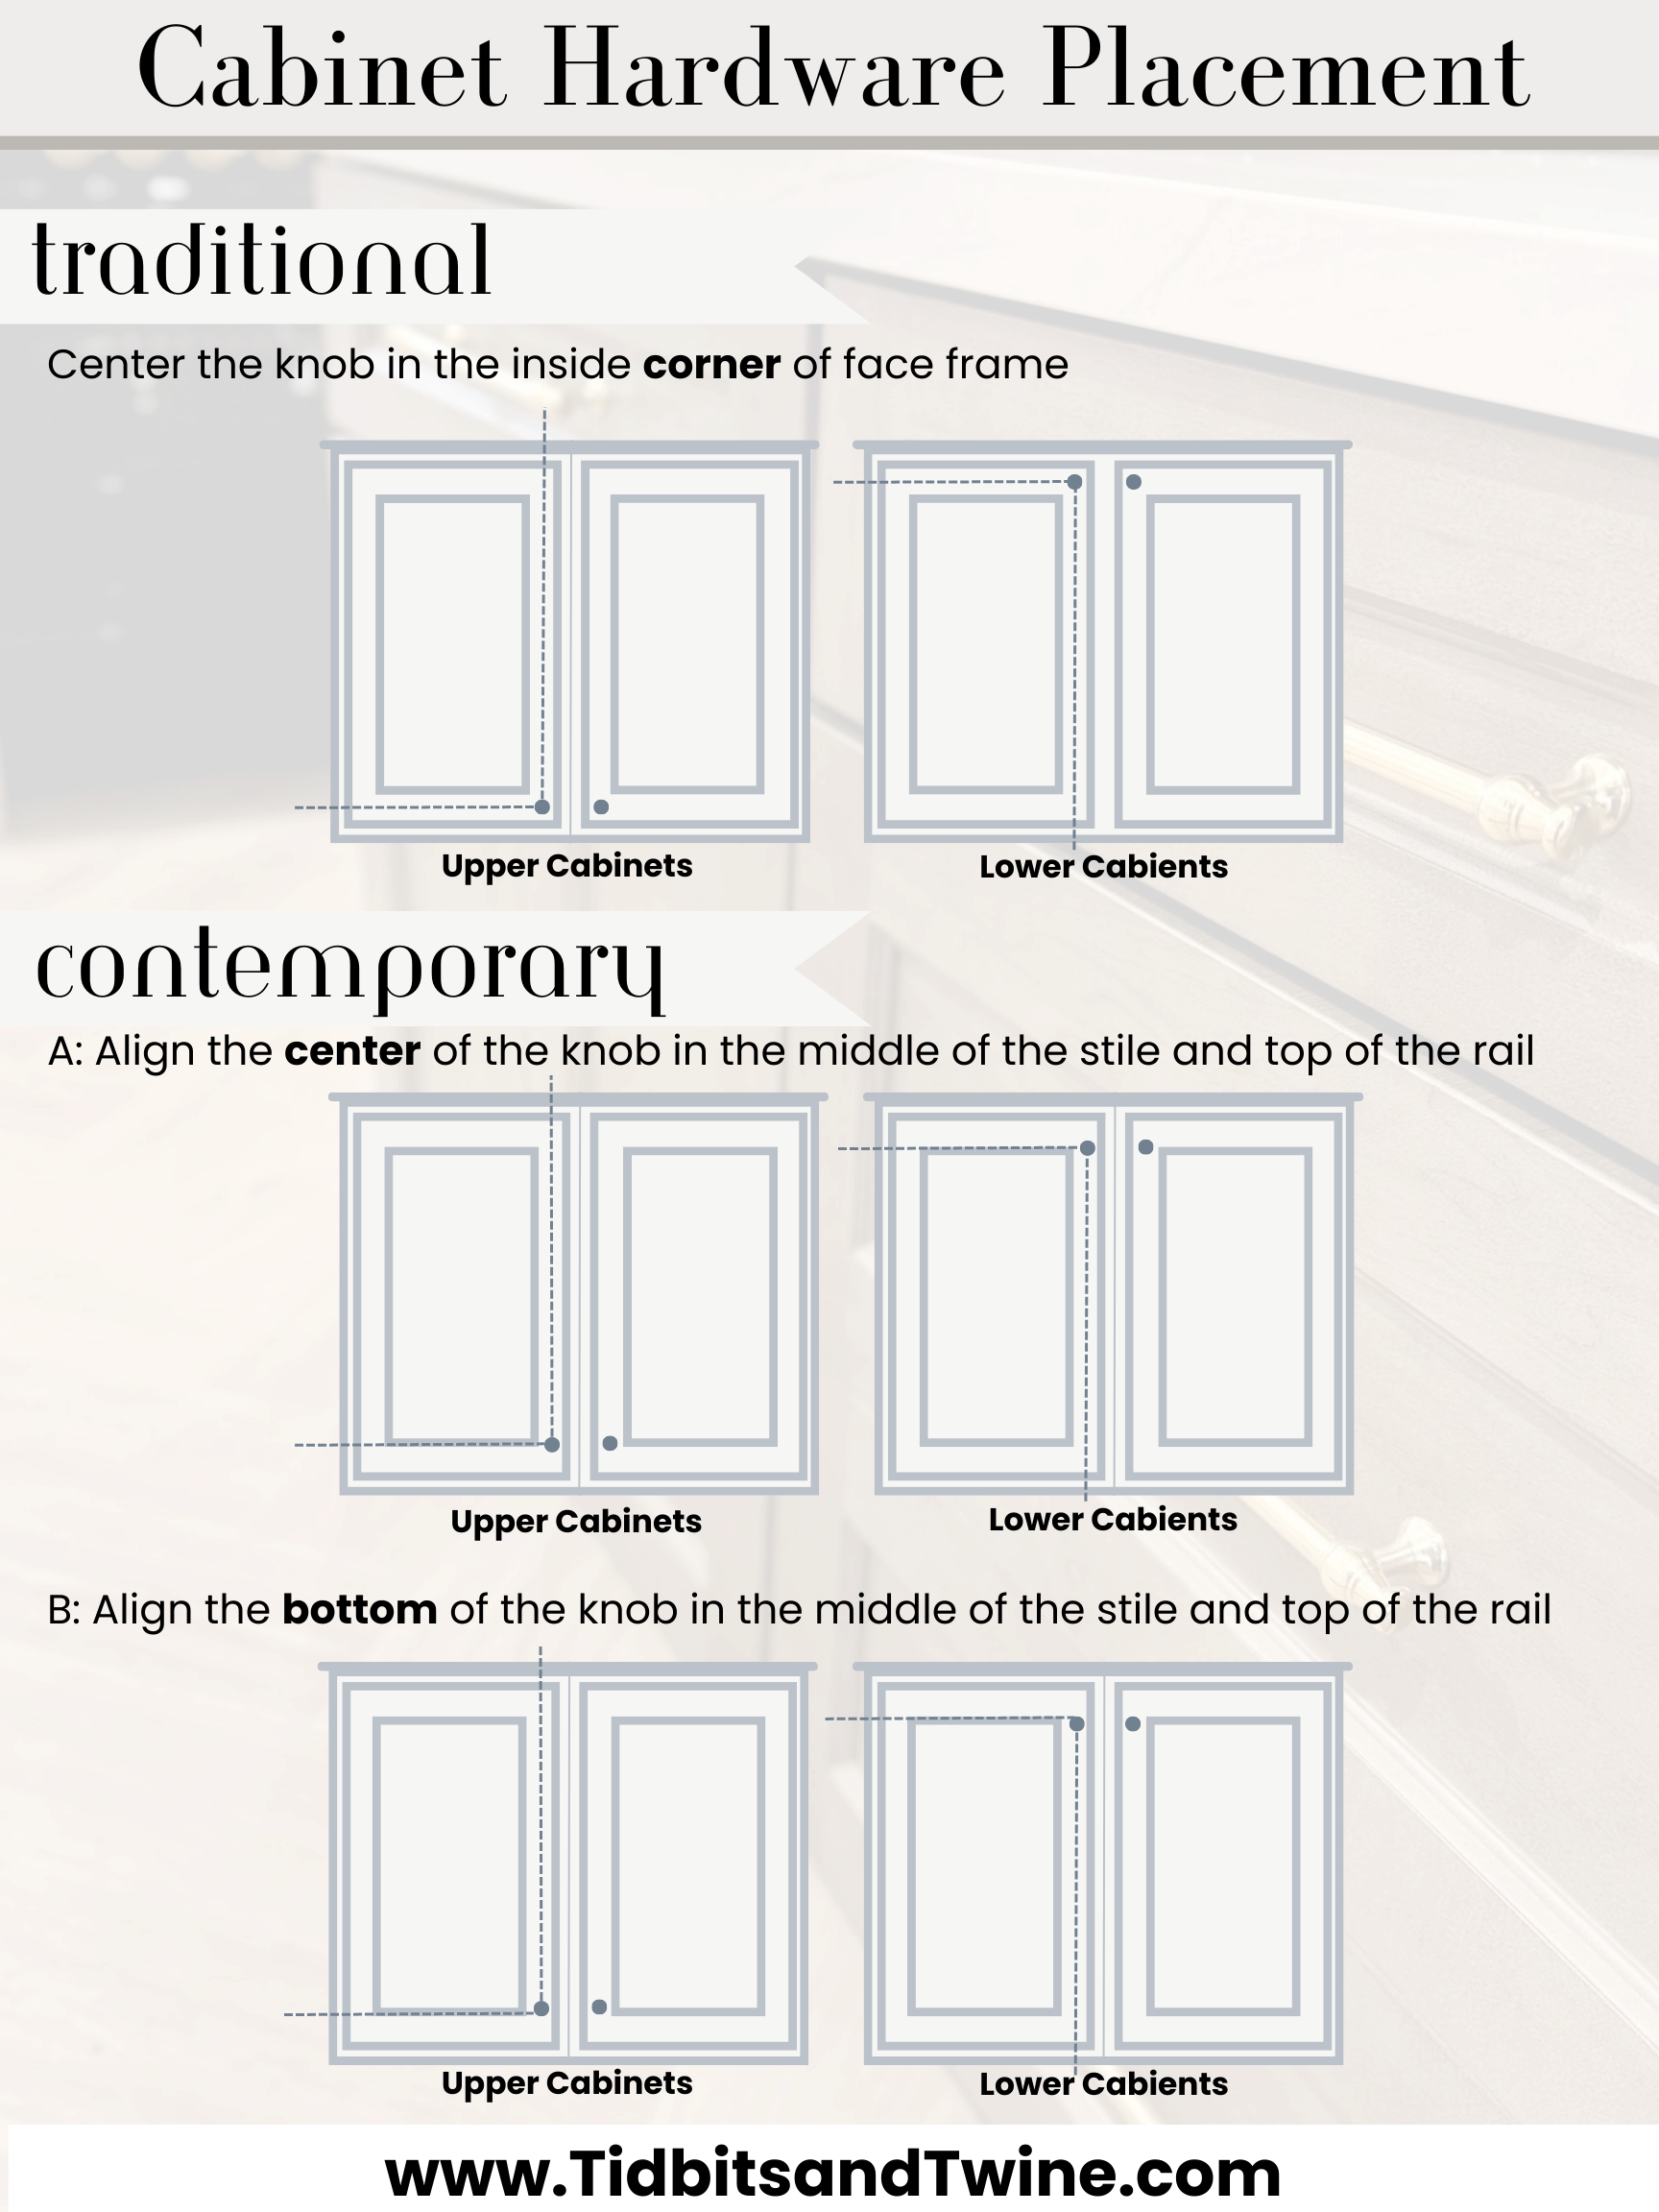 diagram of cabinet hardware placement showing traditional placement and contemporary placement for upper and lower cabinets